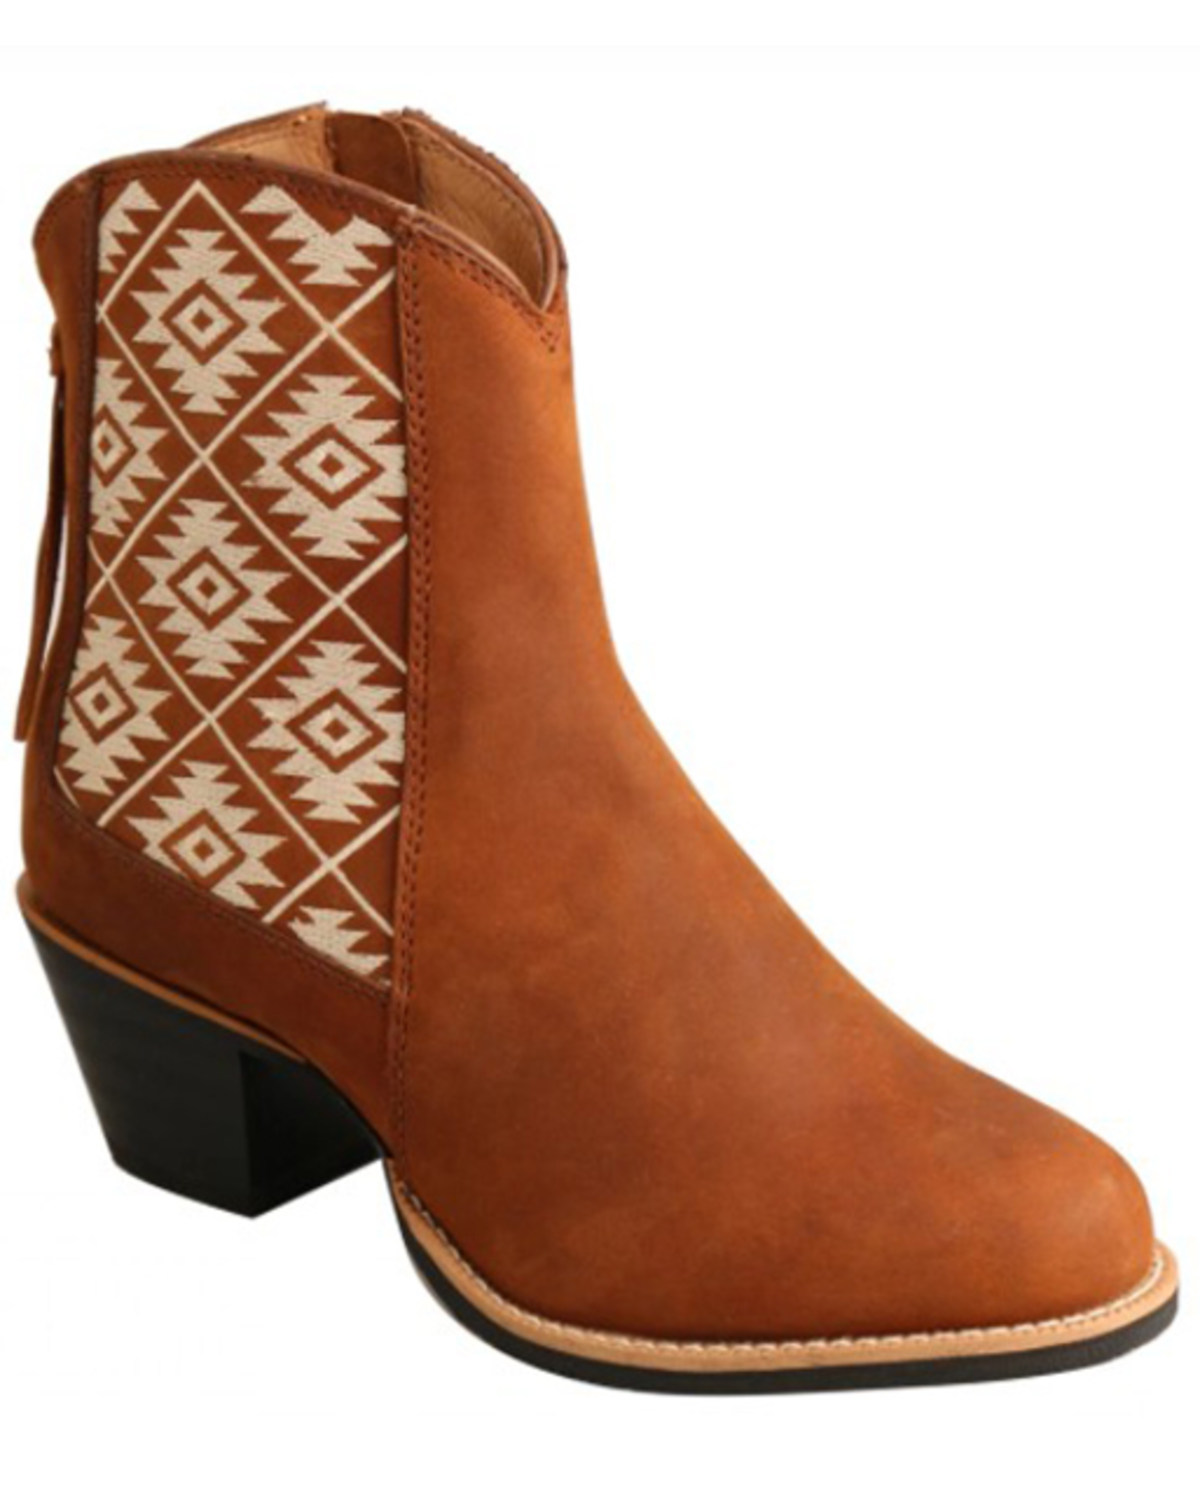 Twisted X Women's Southwestern Printed Western Booties - Round Toe